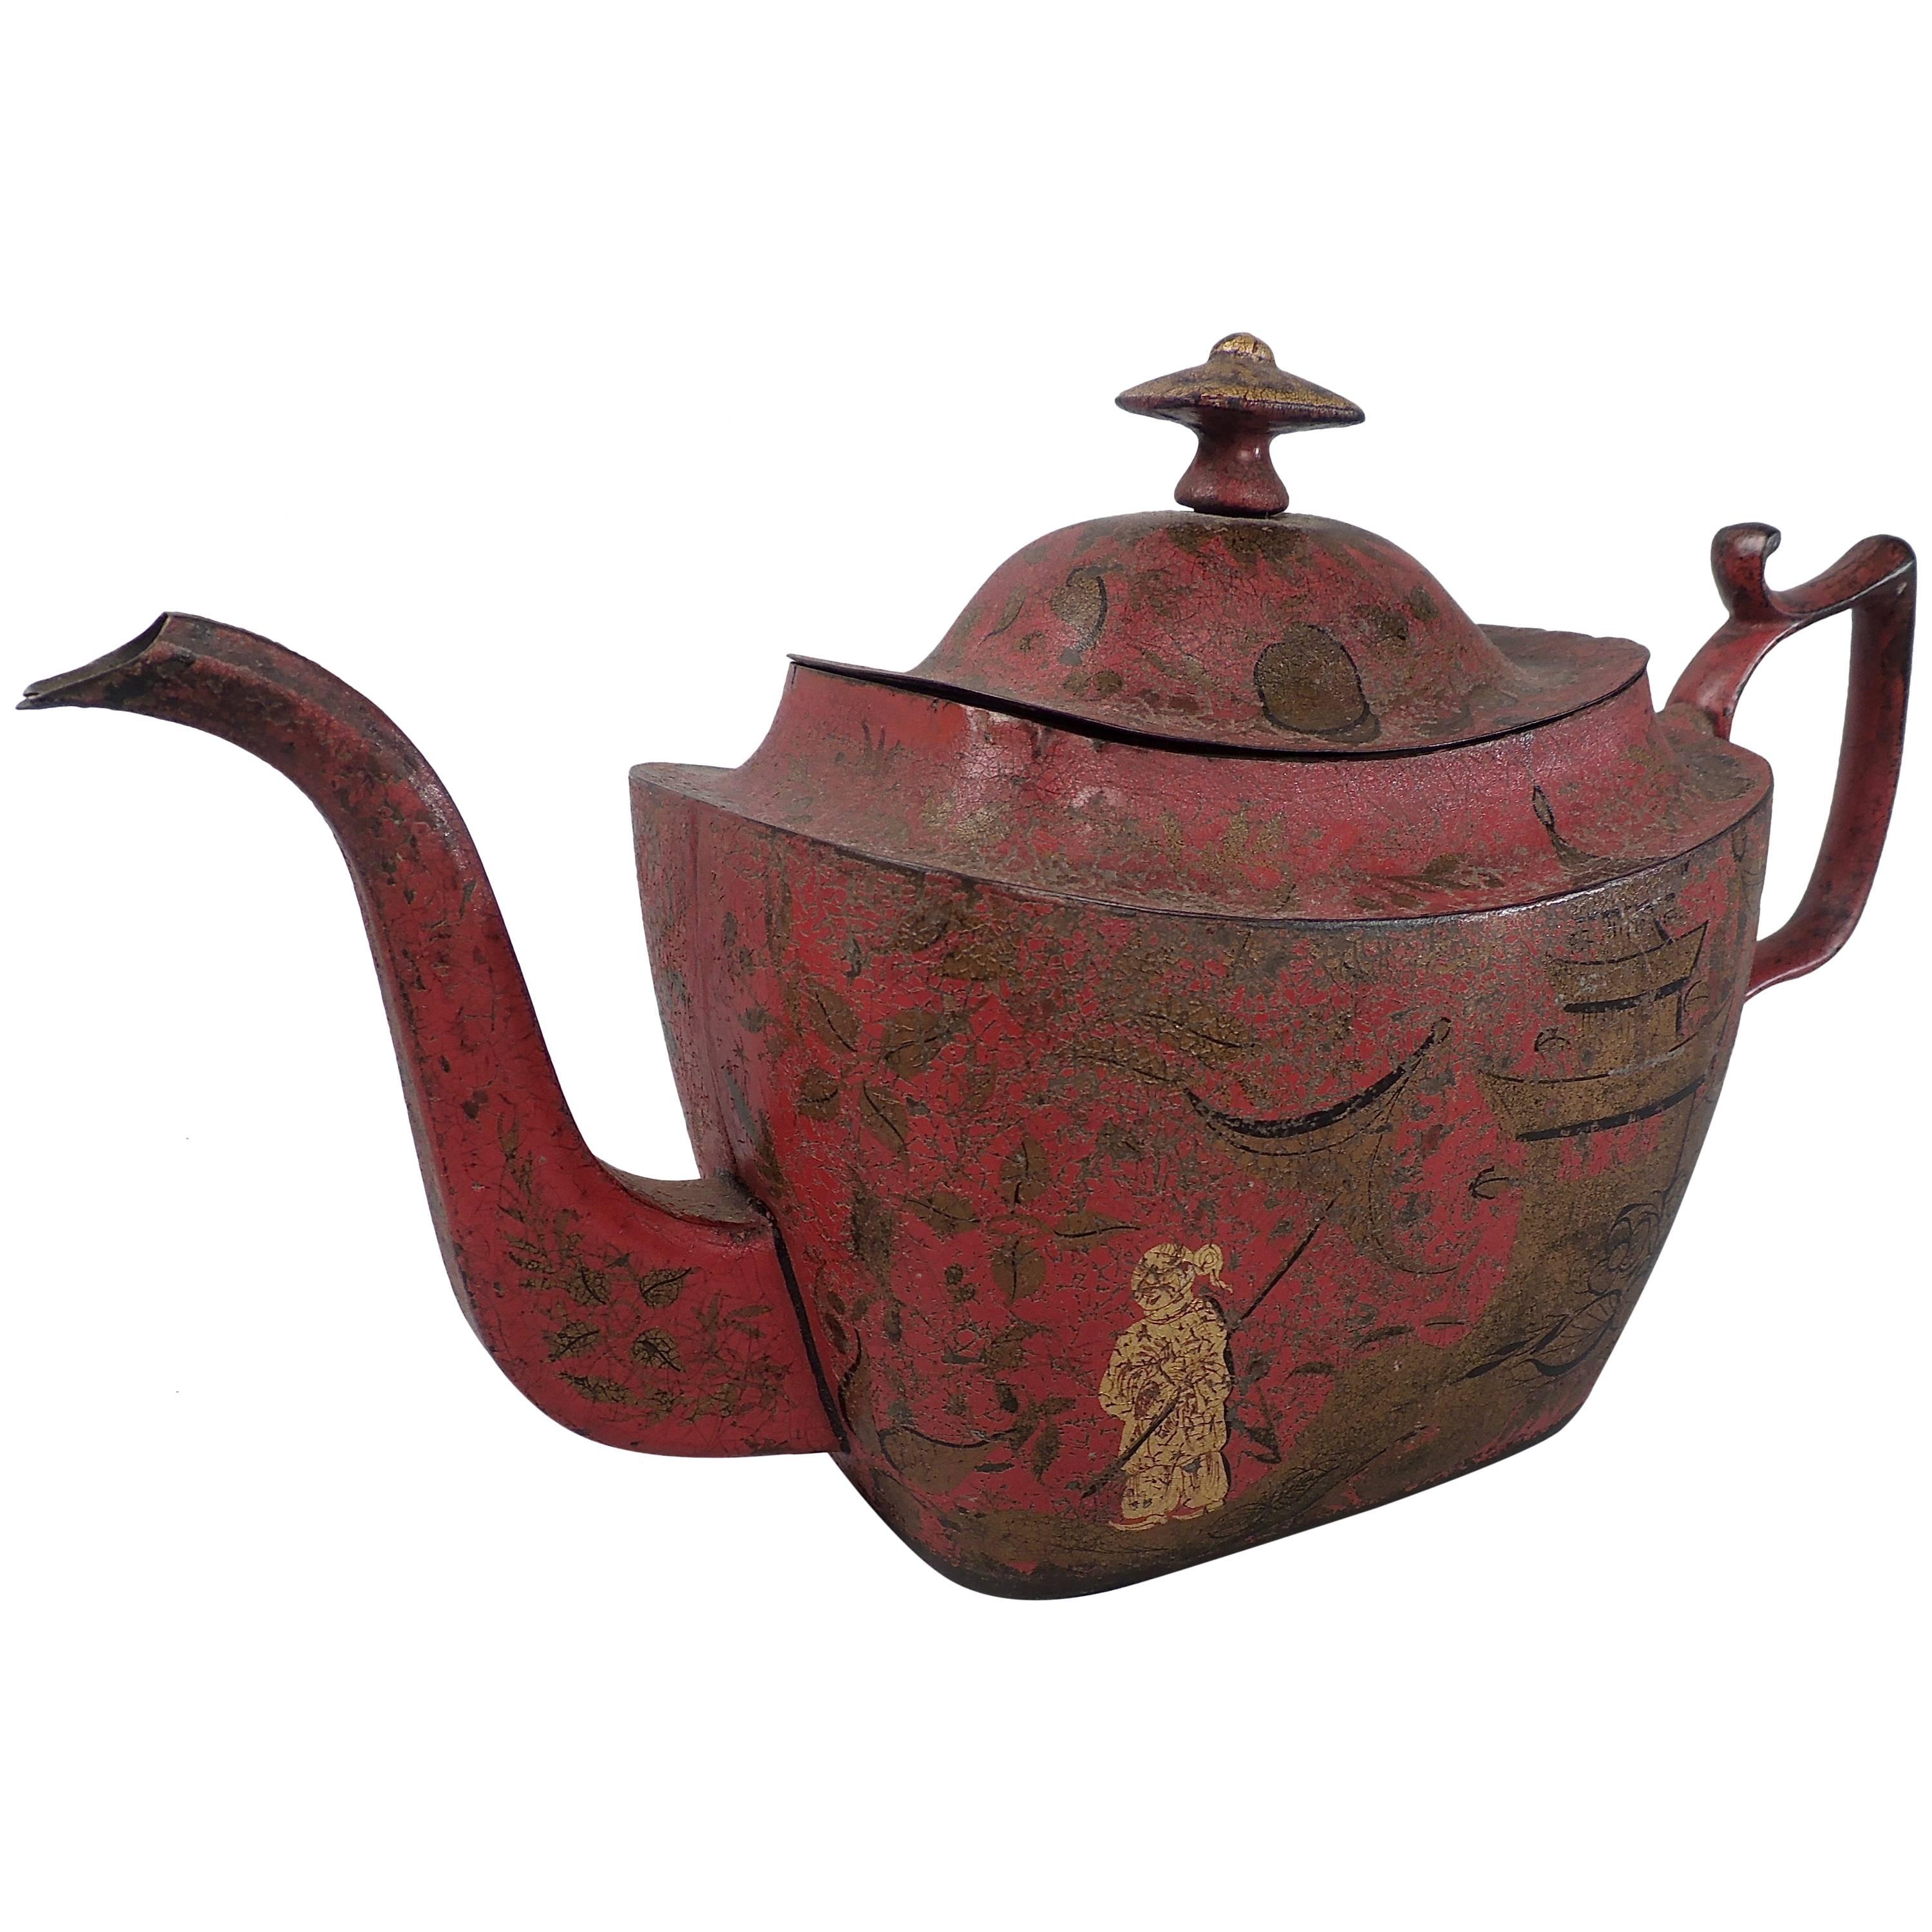 Antique Georgian Red Tole Peinte or Toleware Teapot with Chinoiserie Decoration